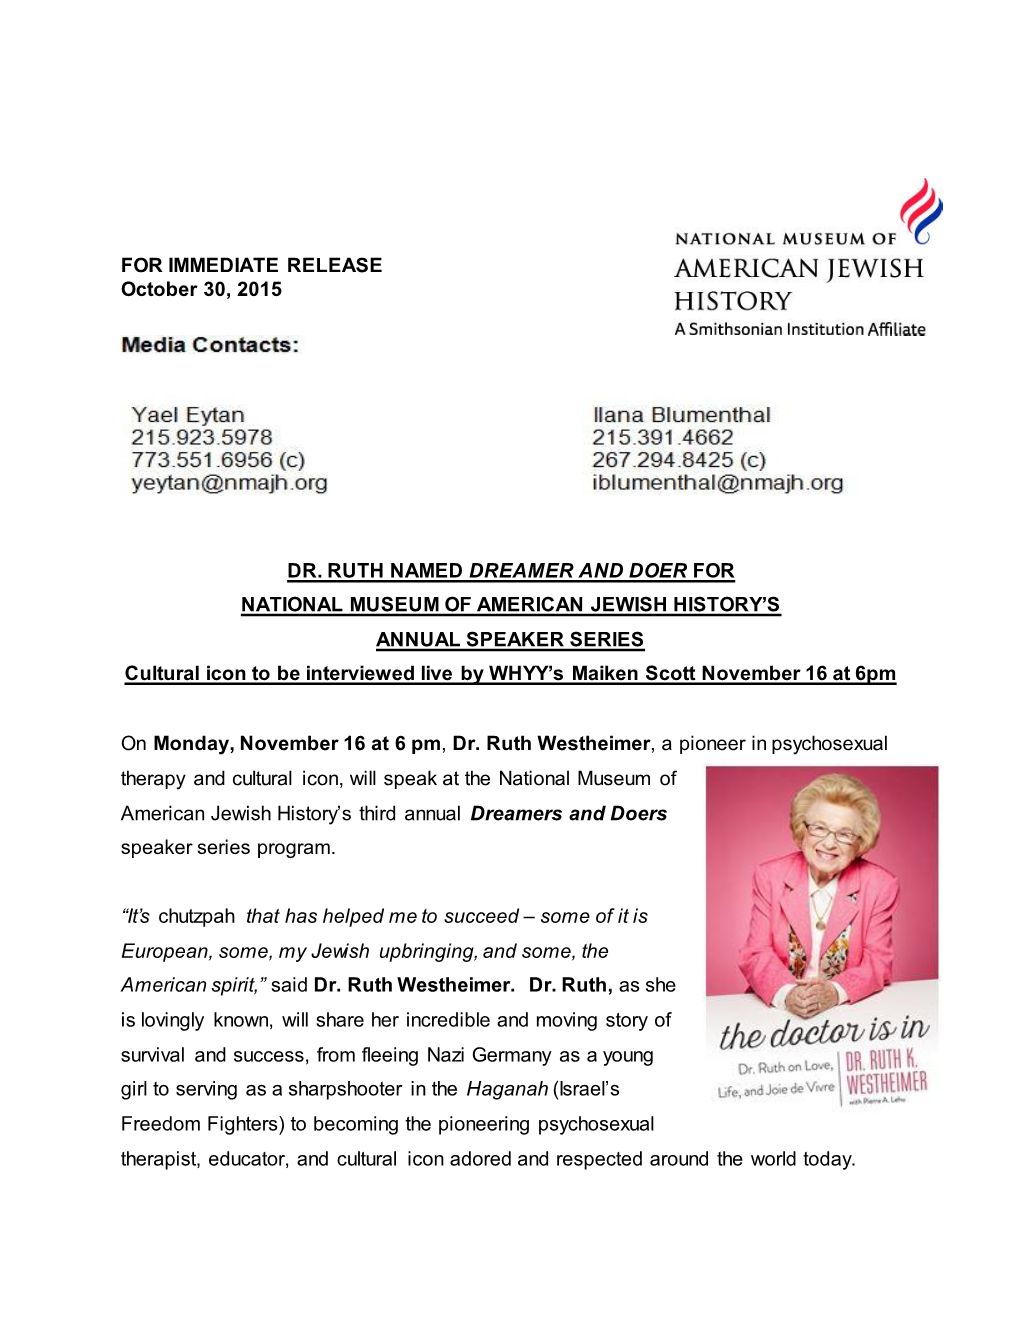 FOR IMMEDIATE RELEASE October 30, 2015 DR. RUTH NAMED